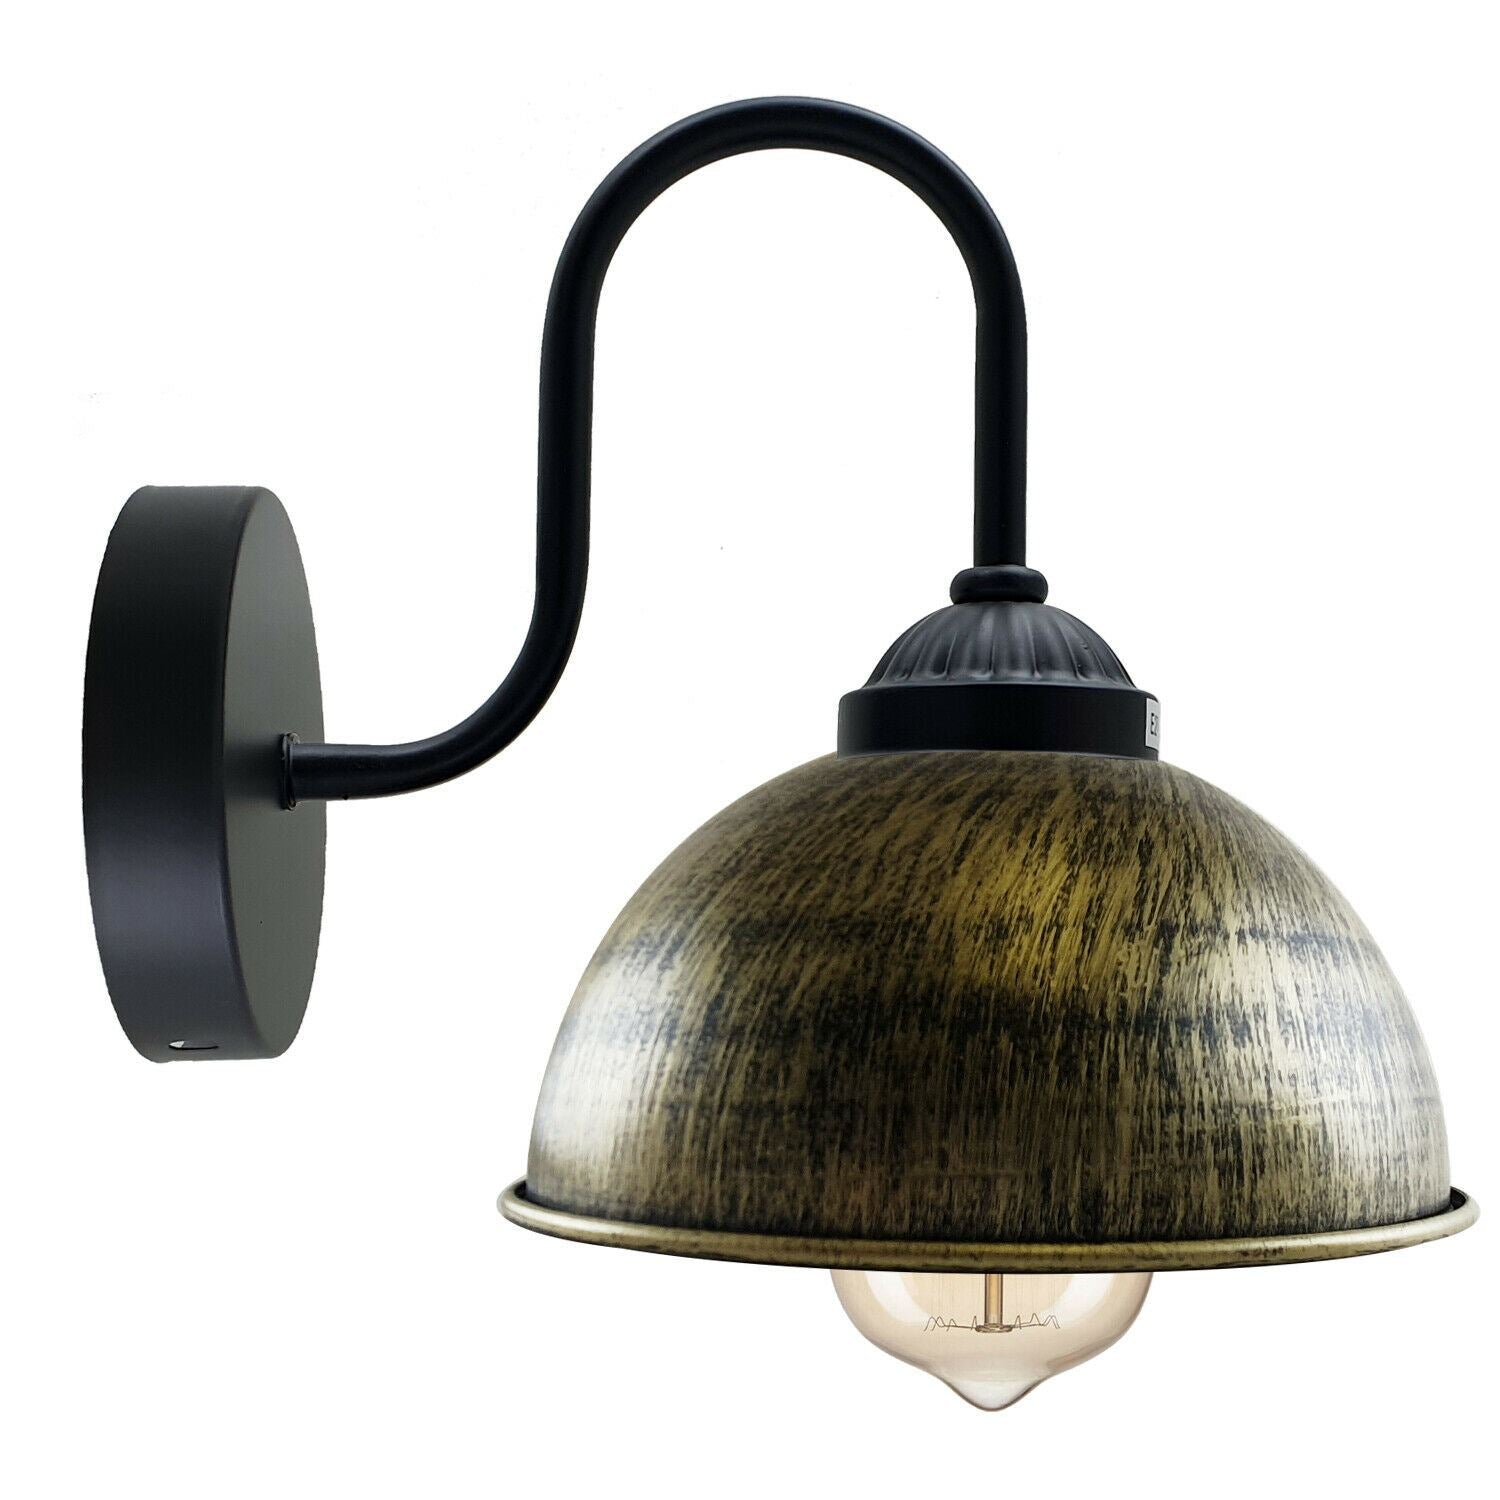 Industrial Wall Light, Retro Wall Lamp with Dome Metal Shade, E27 Indoor Wall Lighting Fixtures~1264 - LEDSone UK Ltd